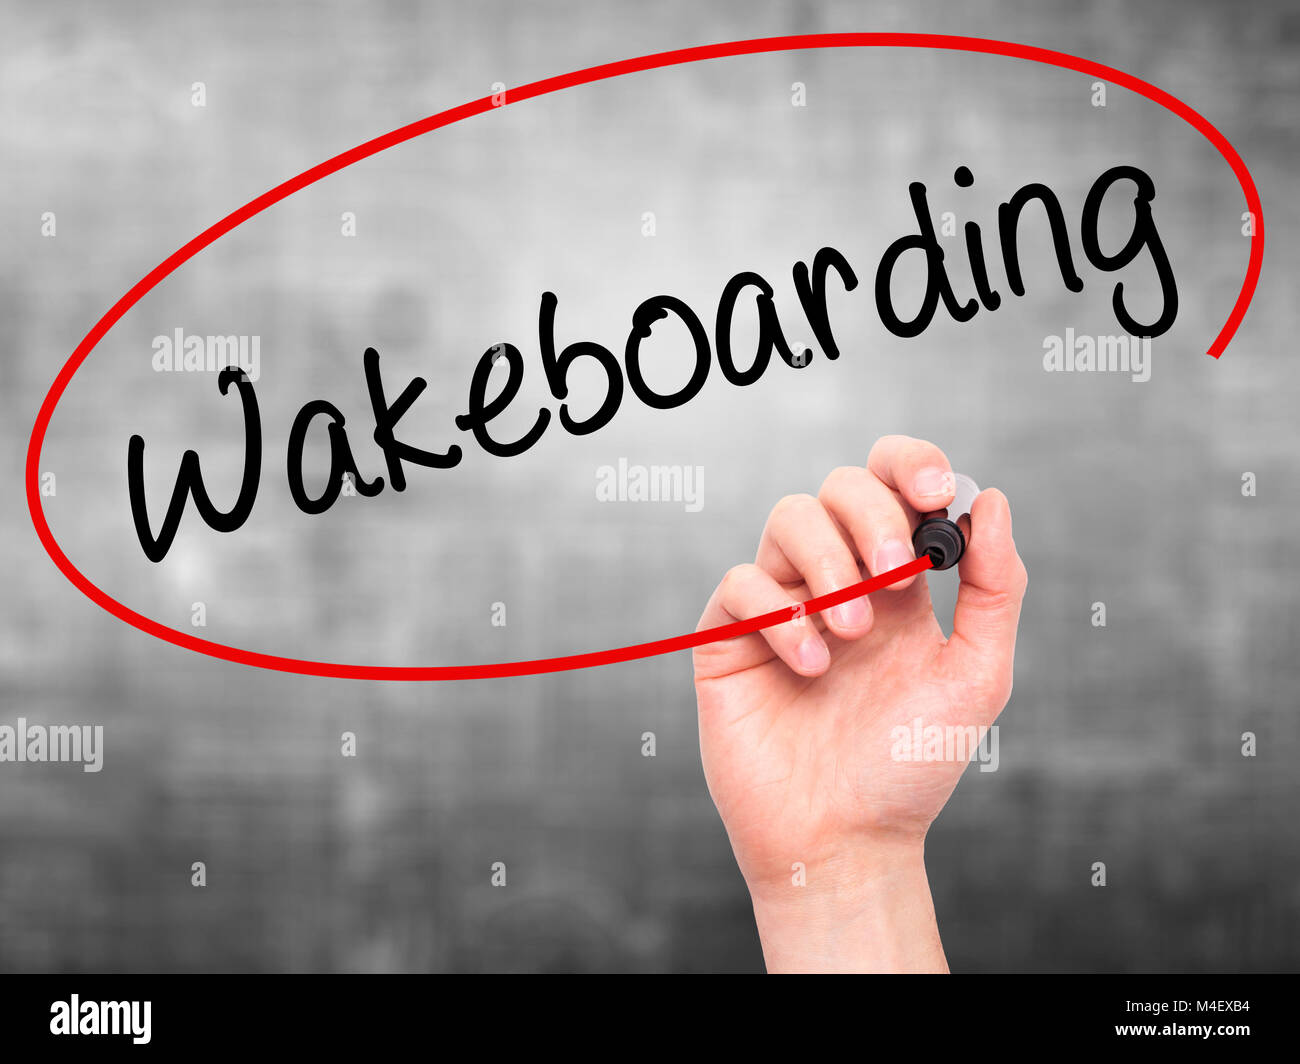 Man Hand writing Wakeboarding with black marker on visual screen. Stock Photo